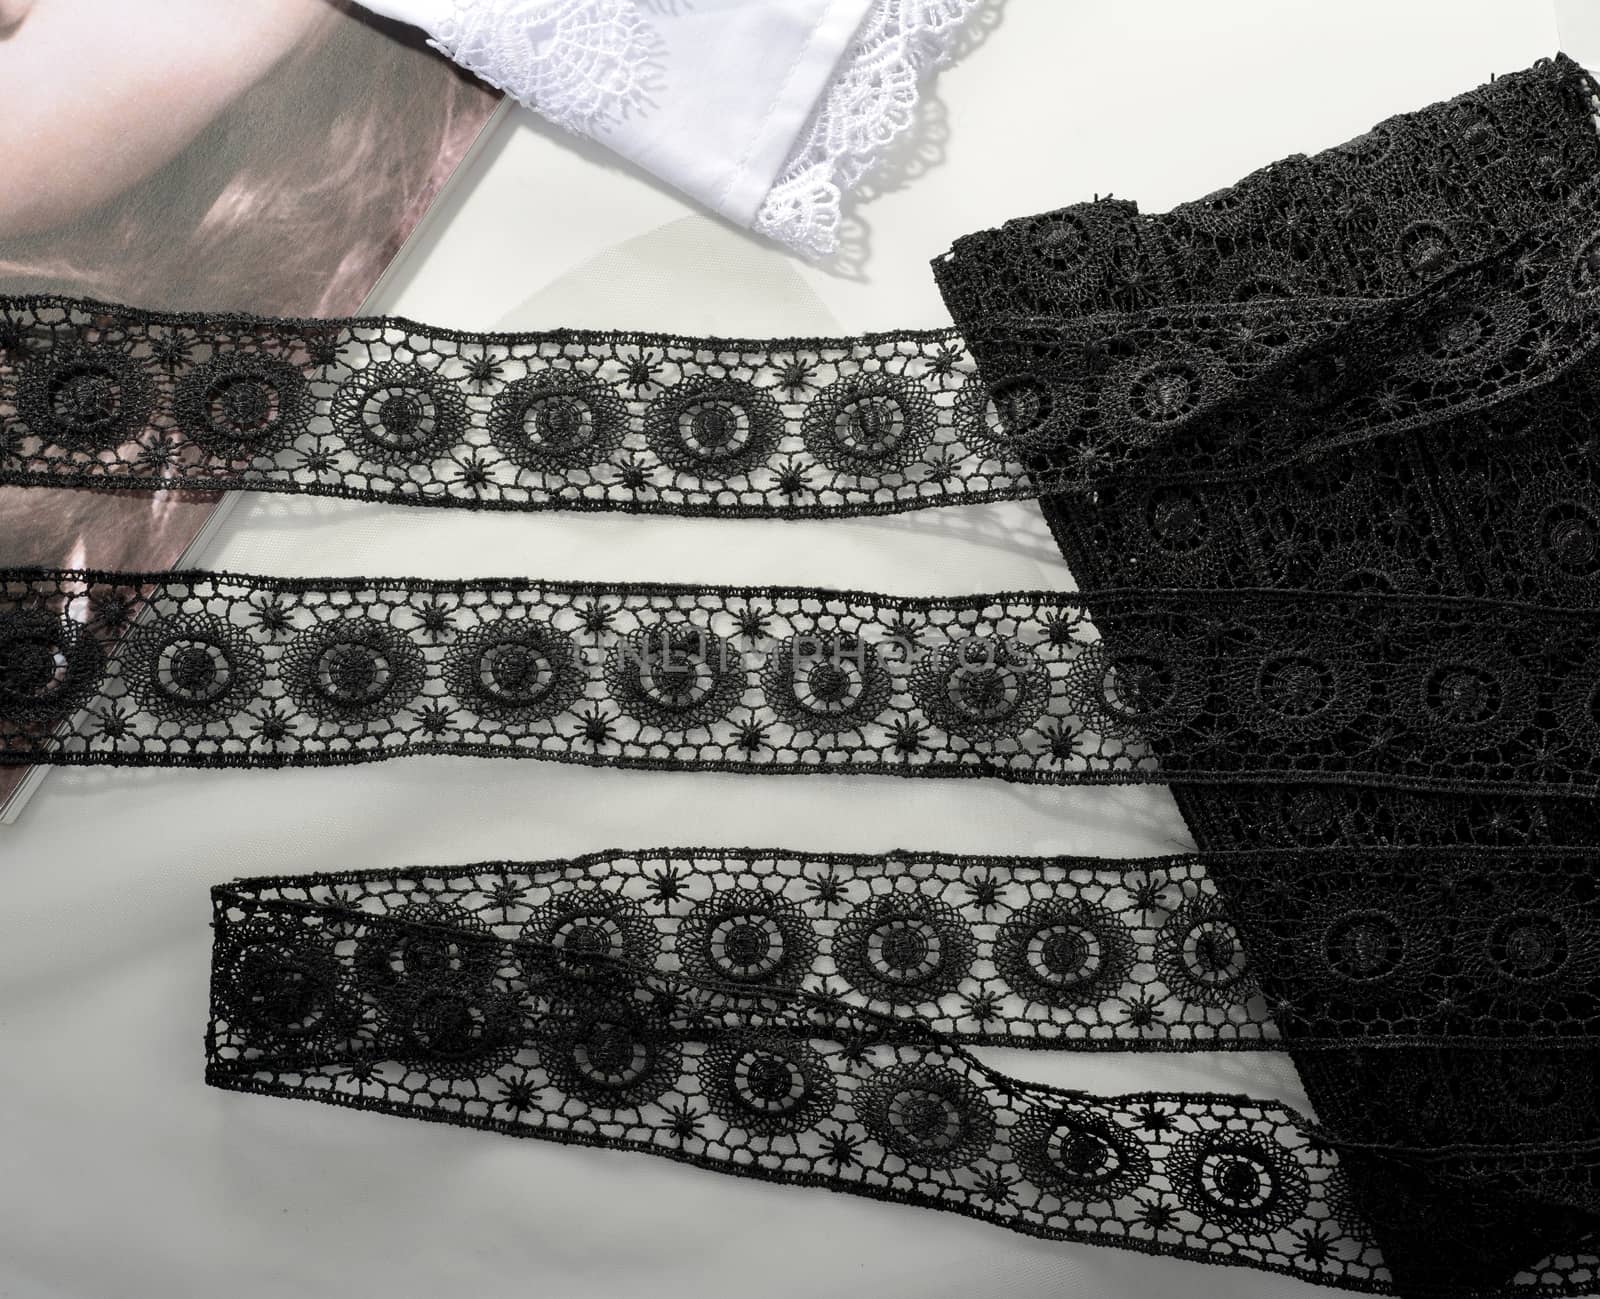 Tapes of black gentle guipure, beauty lace fabric on light background. Elastic material. Using for Atelier and needlework store.